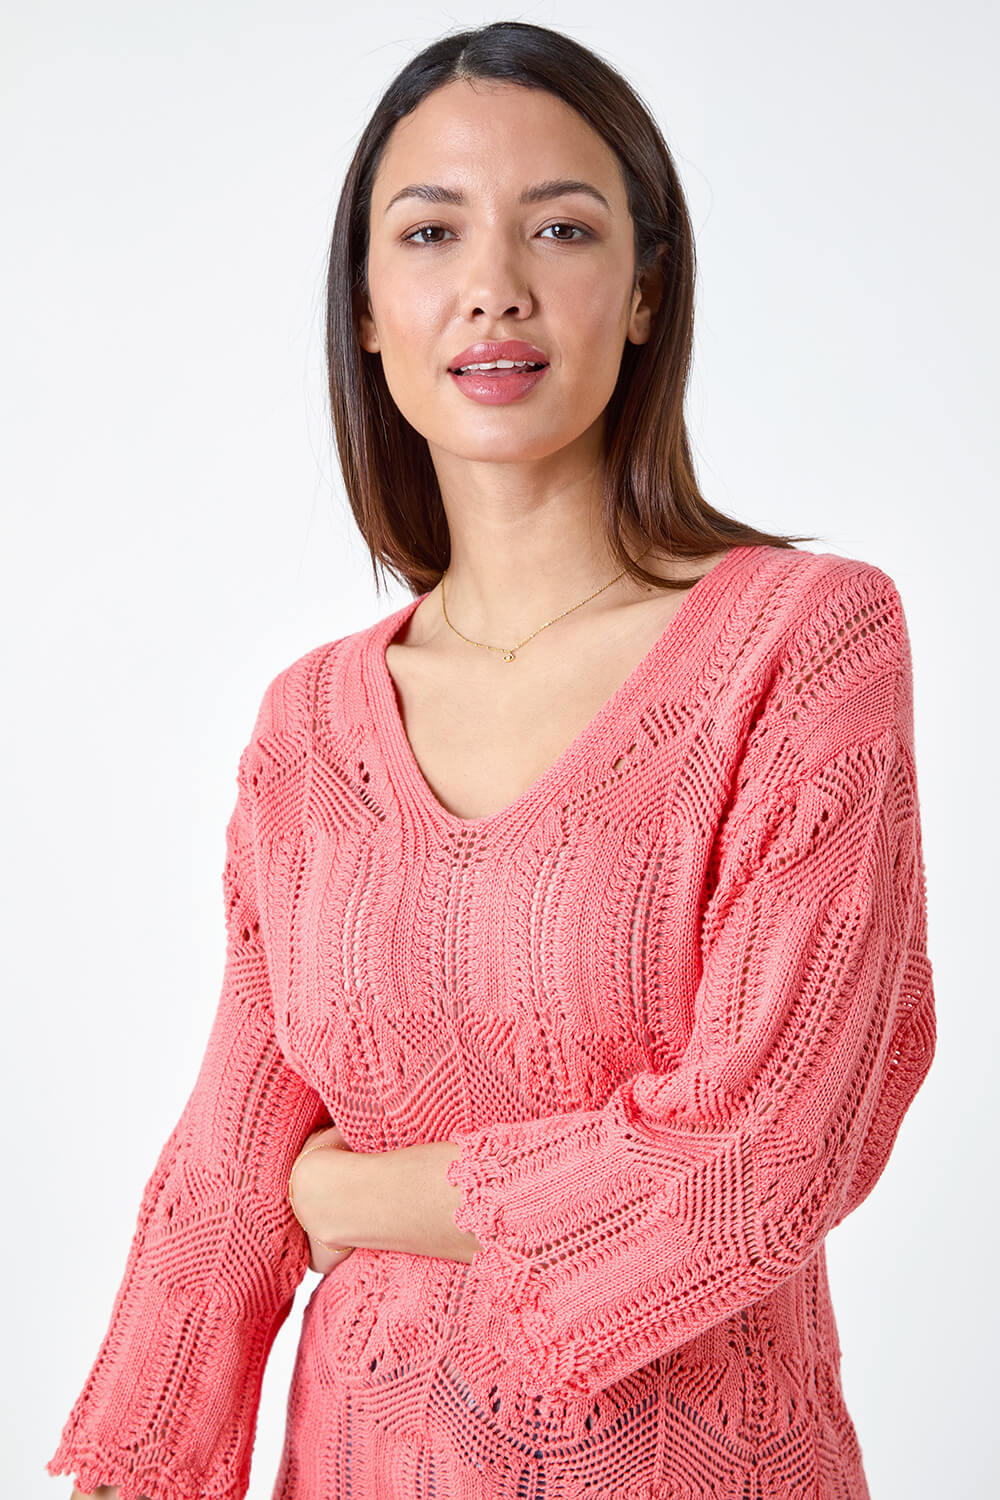 CORAL Open Knit Cotton Blend Tunic Top, Image 4 of 5